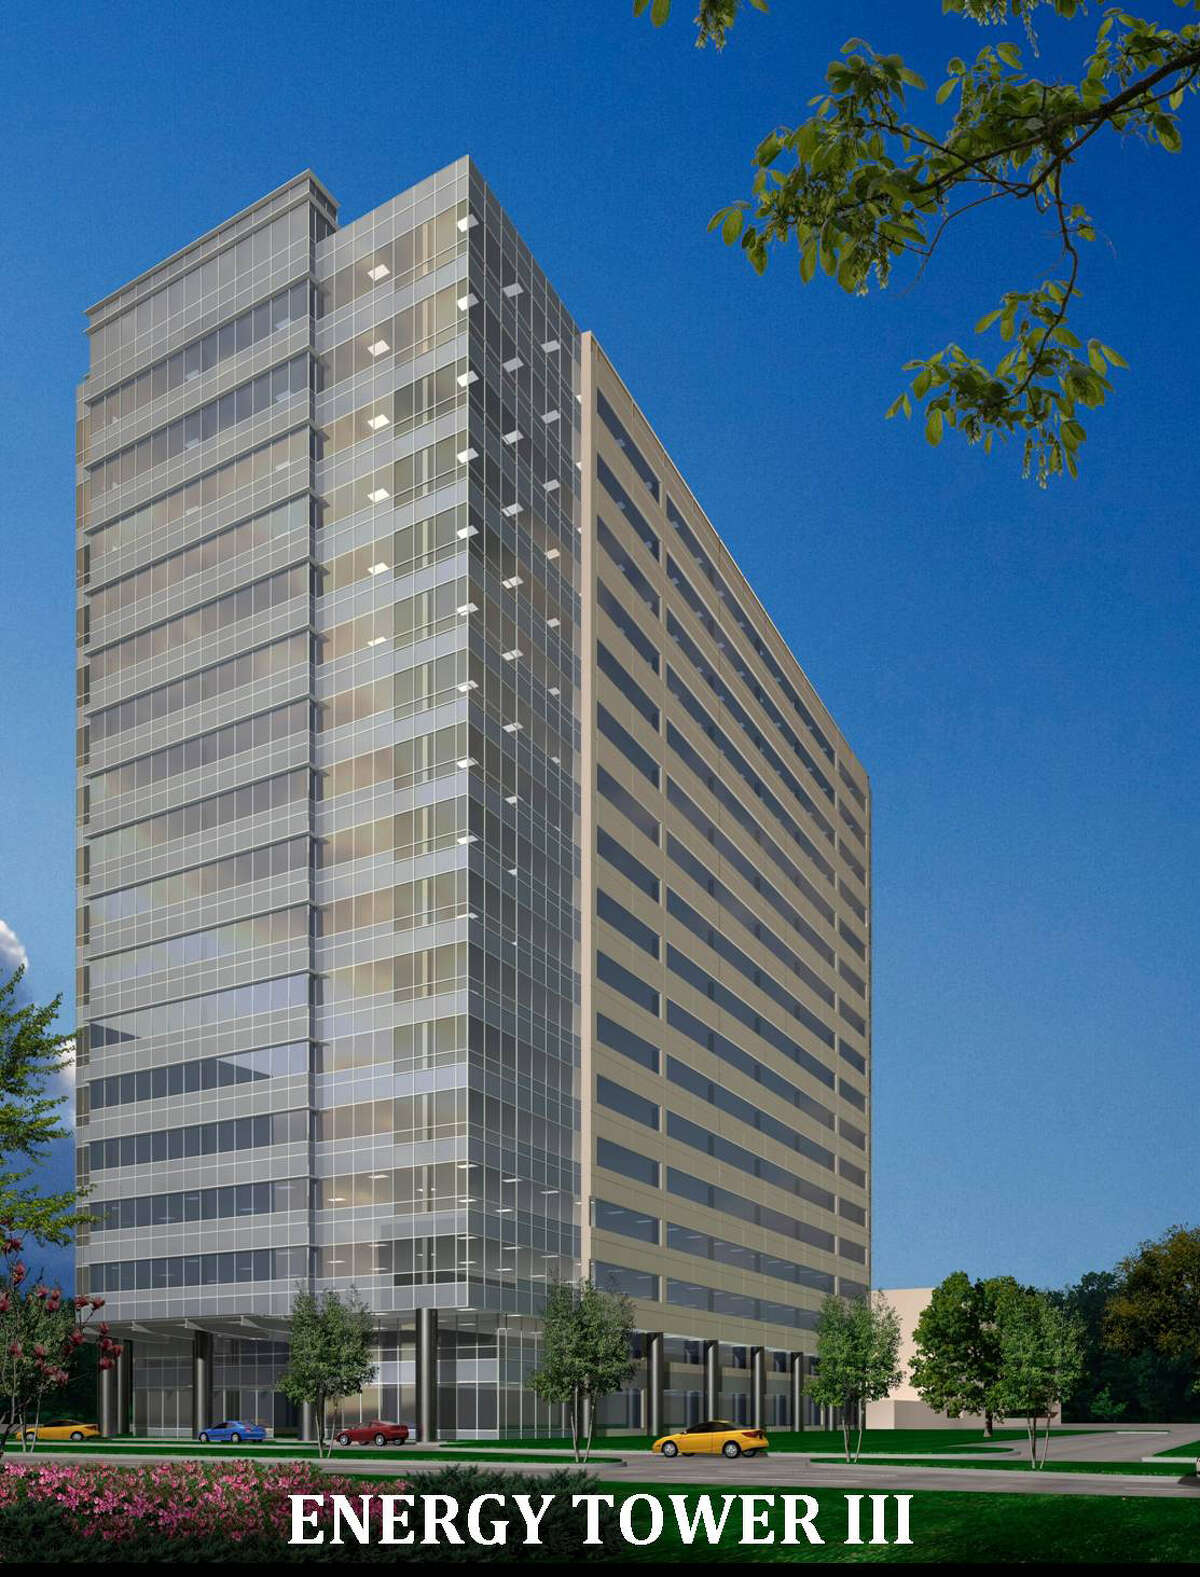 Technip has signed a lease for an entire 17-story building under construction along the Katy Freeway.